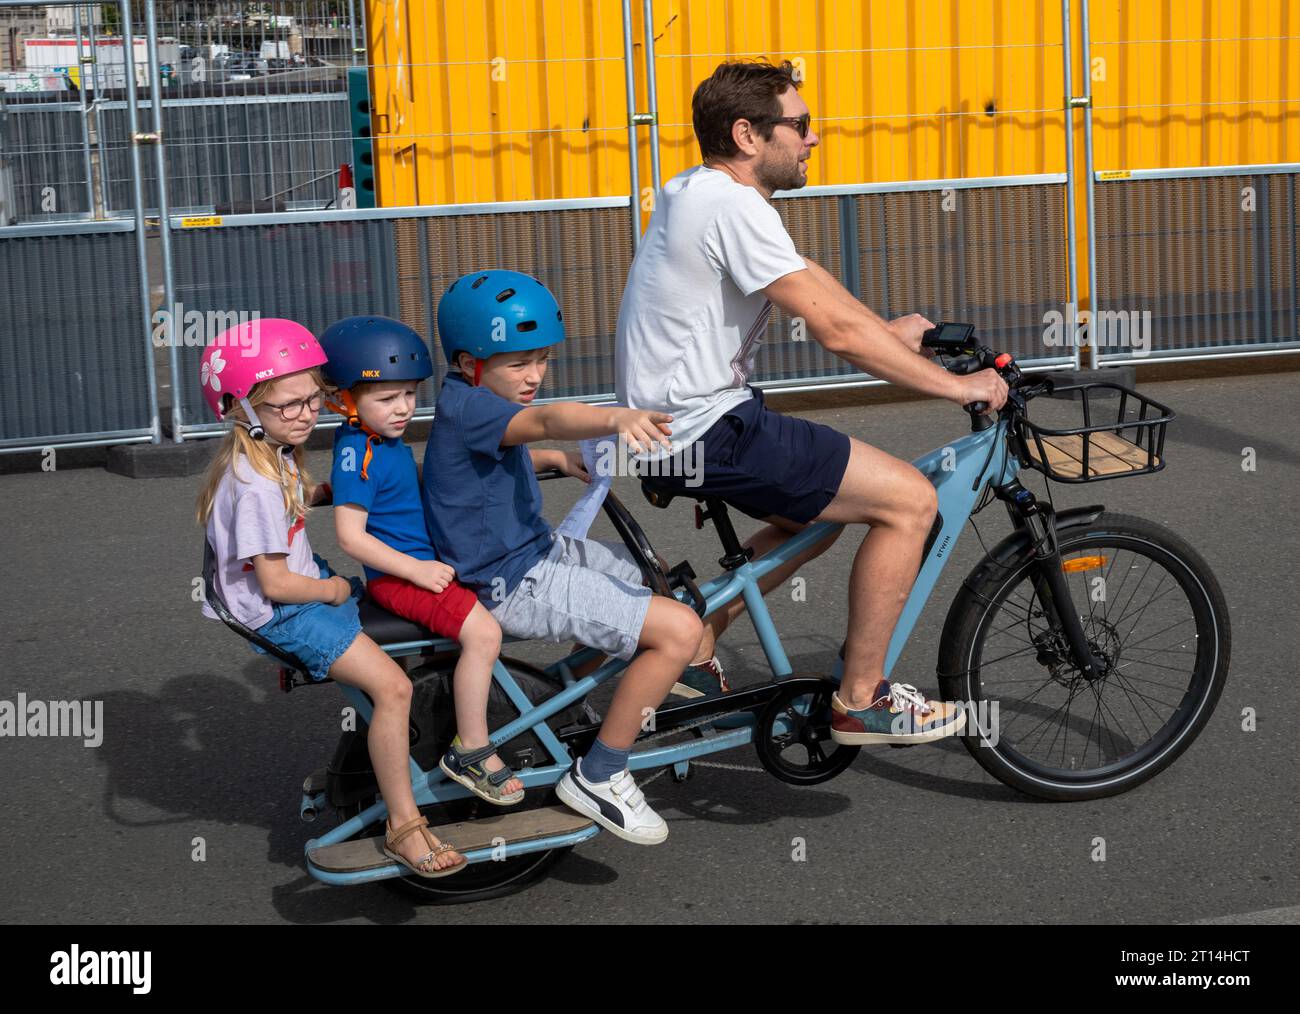 A boy points as a father rides an electric bicycle carrying three young children on the rear in Paris, France. The bike is a Decathlon ELOPS BTWIN ele Stock Photo